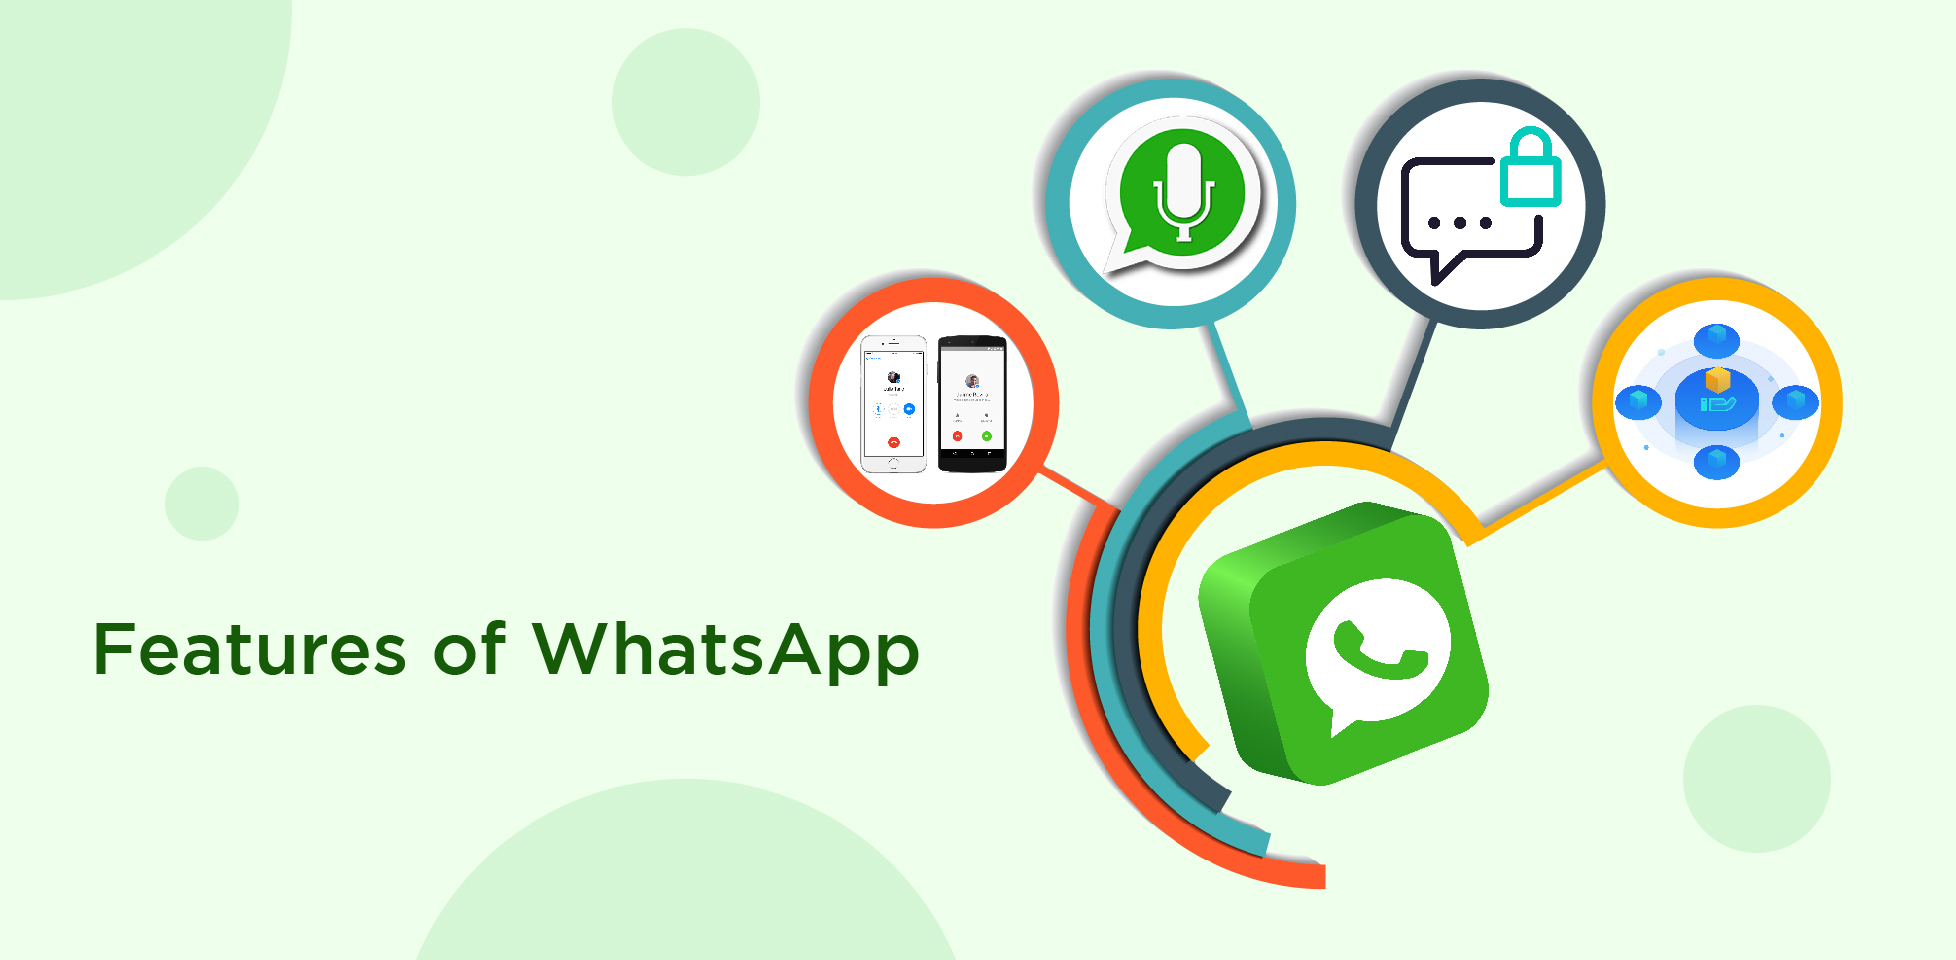 Features of WhatsApp